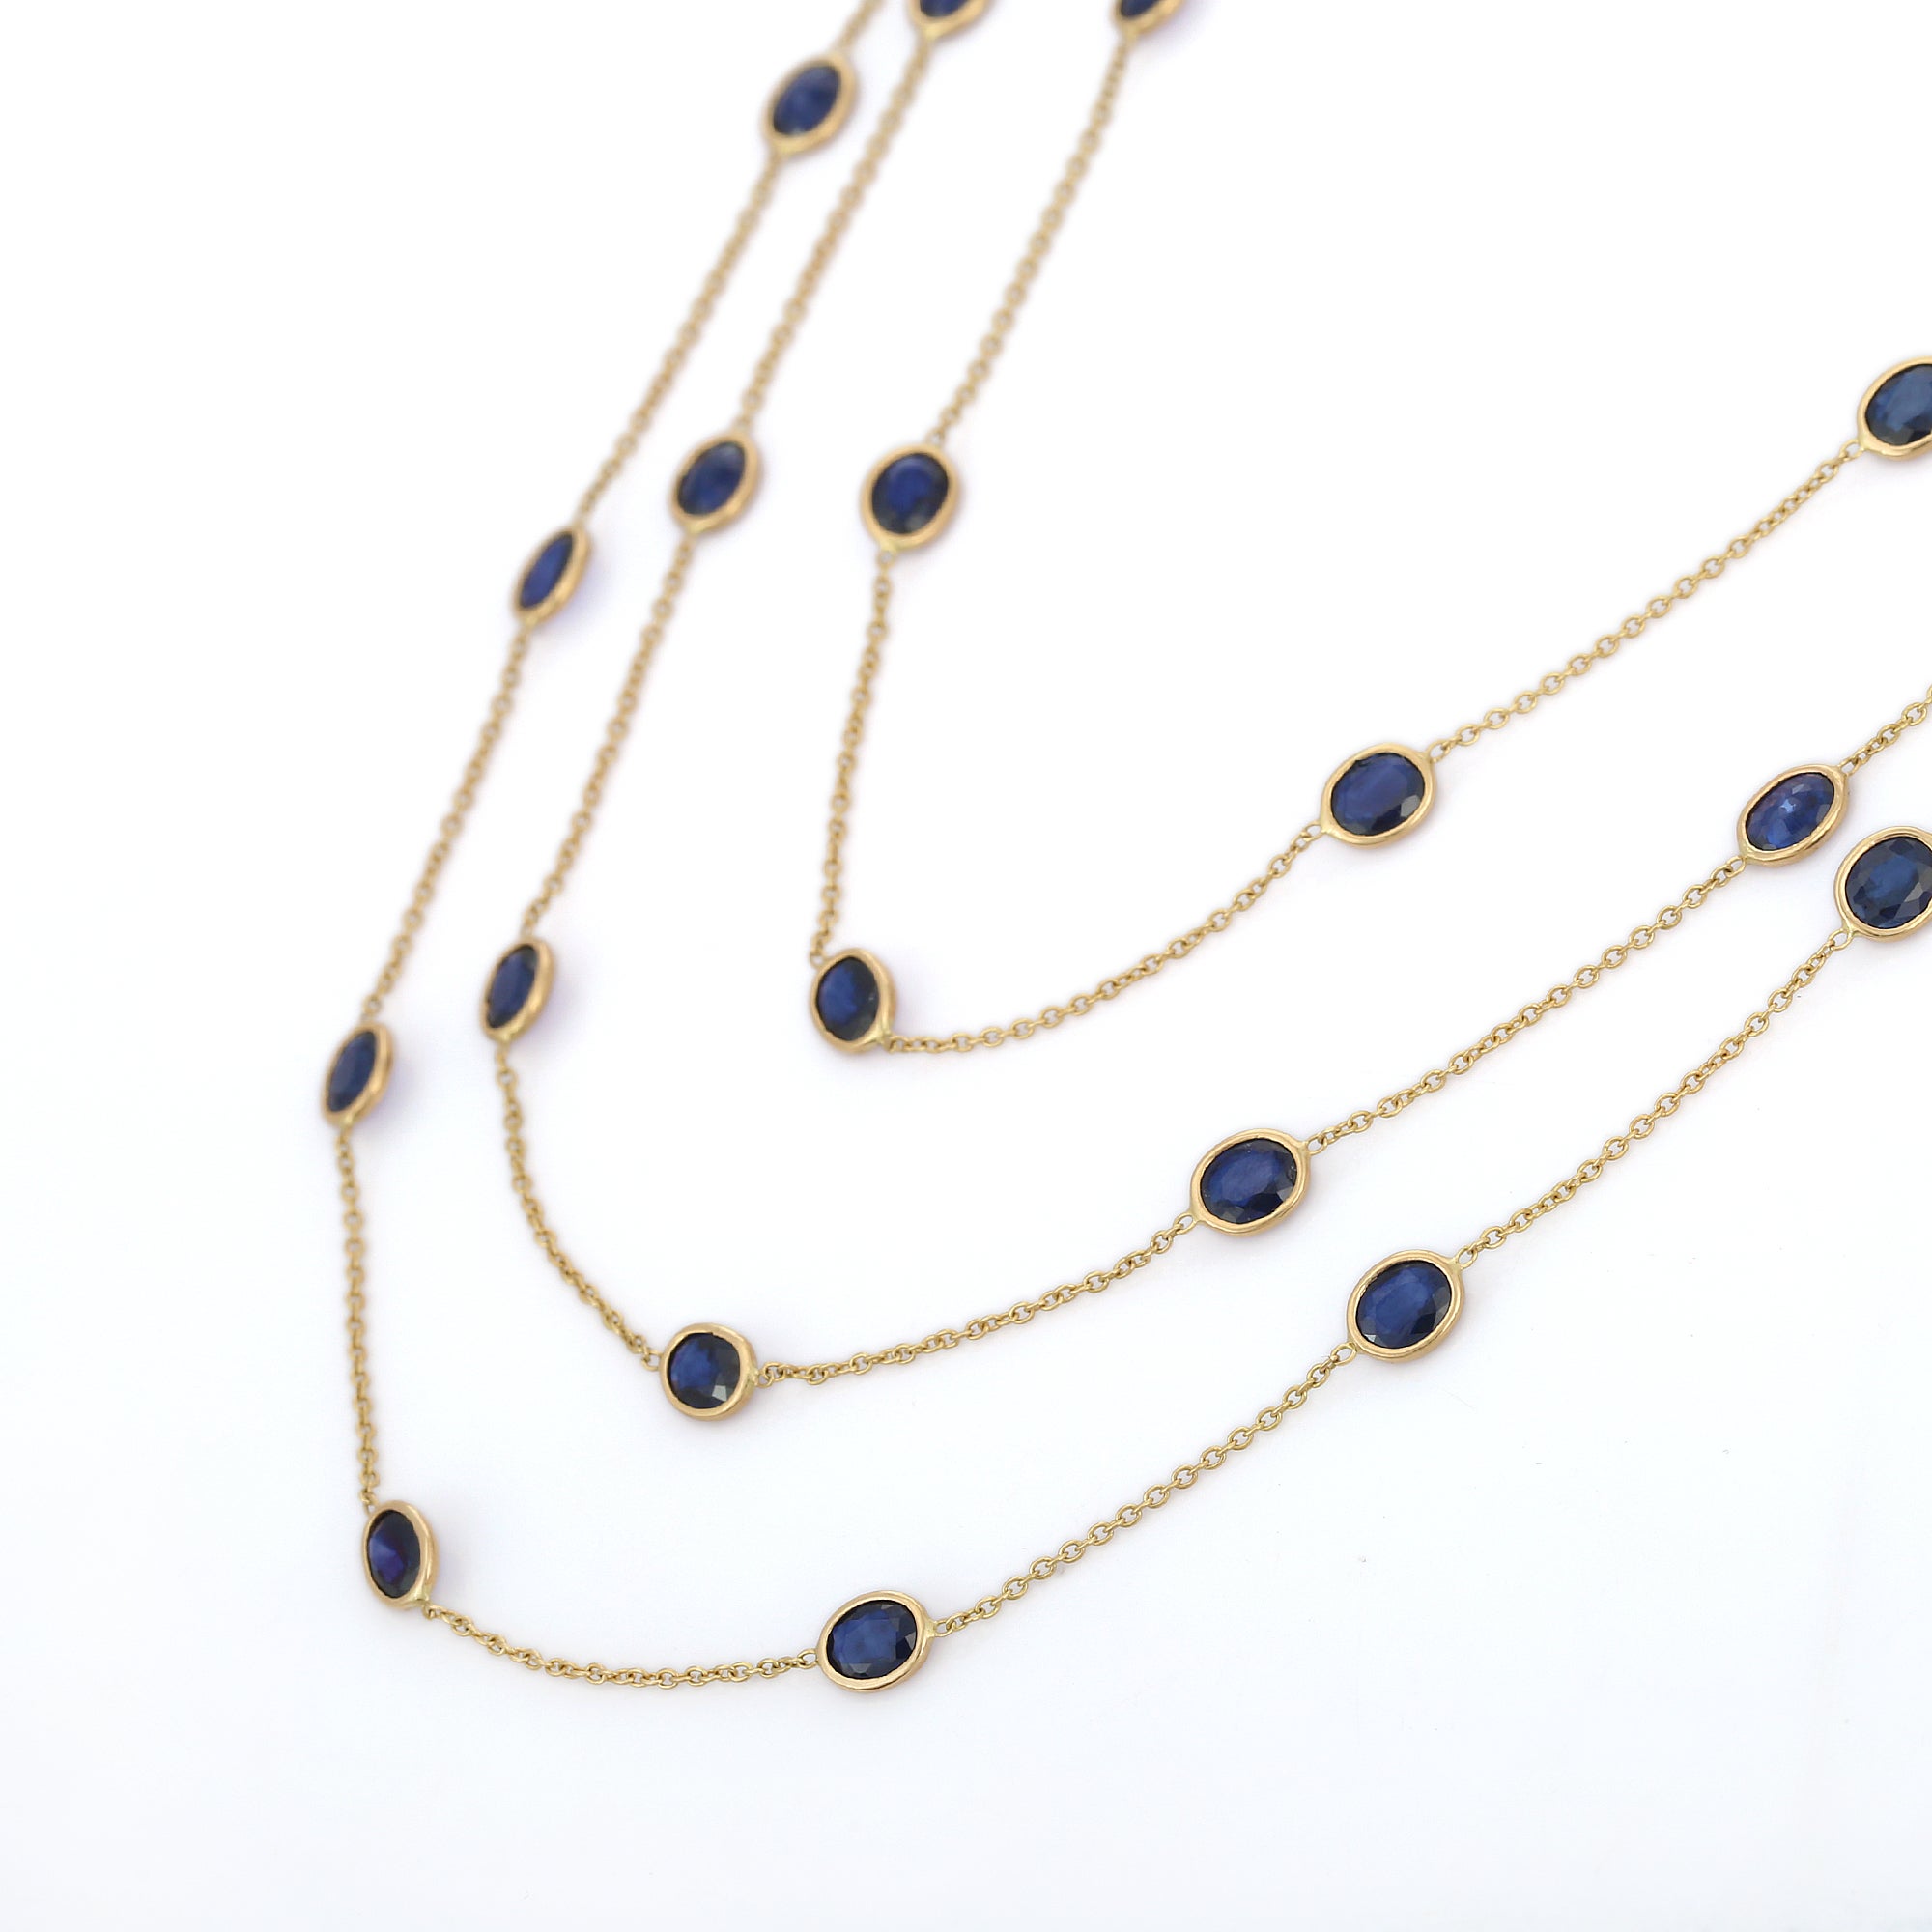 Blue Sapphire Necklace in 18K Gold studded with oval cut Blue sapphire pieces.
Accessorize your look with this elegant blue sapphire beaded necklace. This stunning piece of jewelry instantly elevates a casual look or dressy outfit. Comfortable and